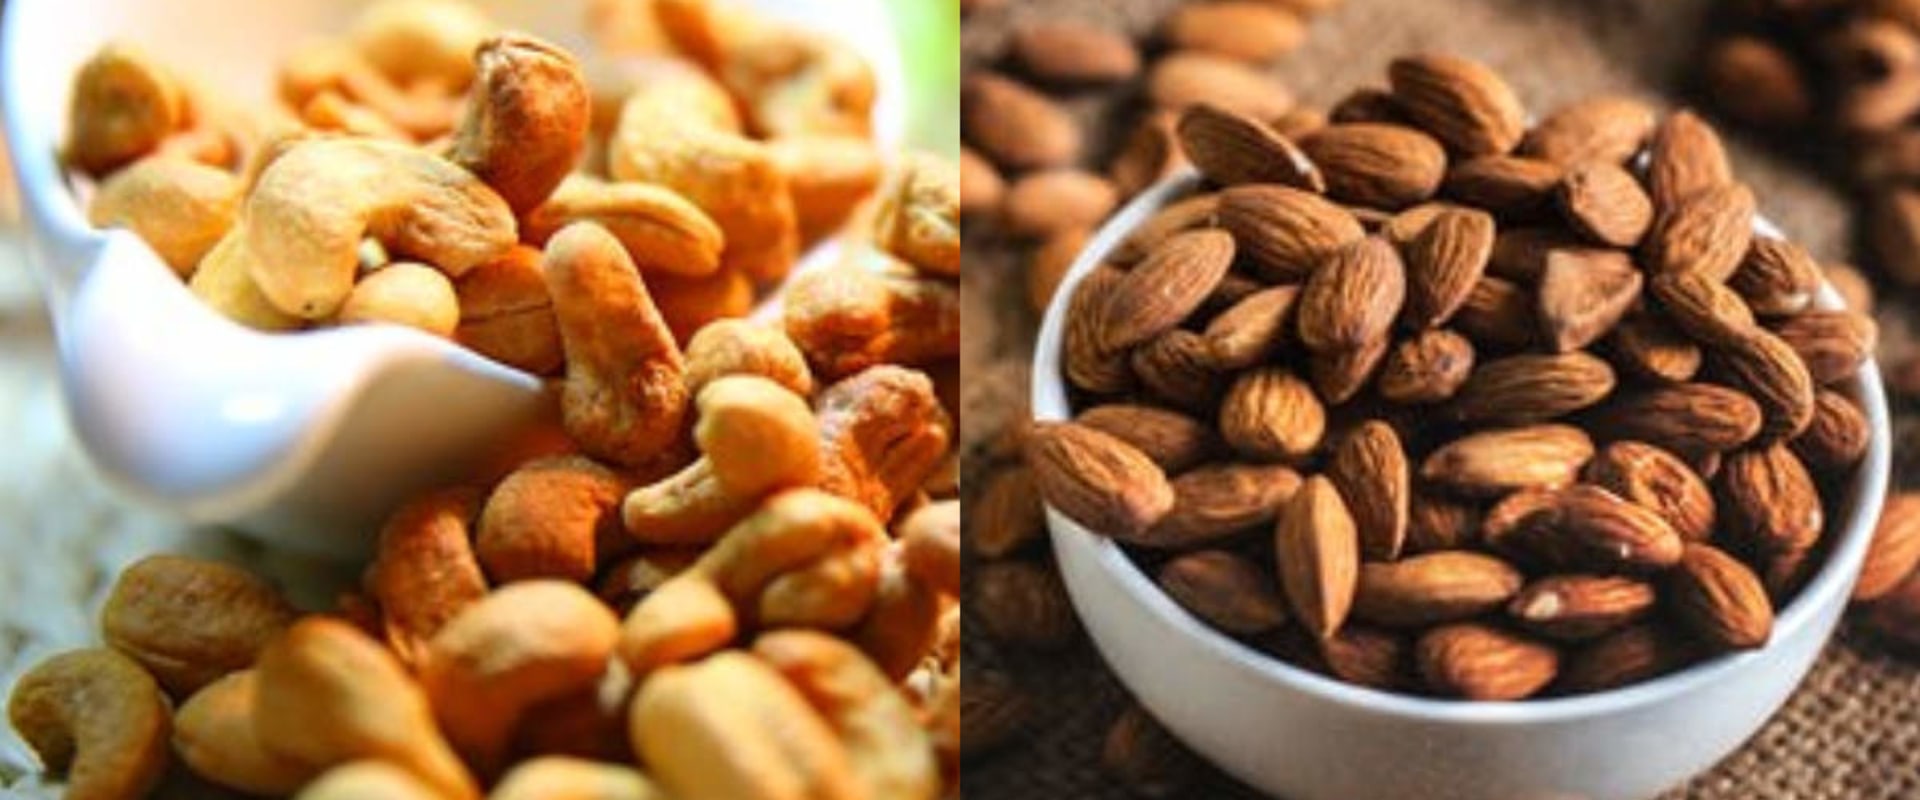 Why are cashews more expensive than almonds?